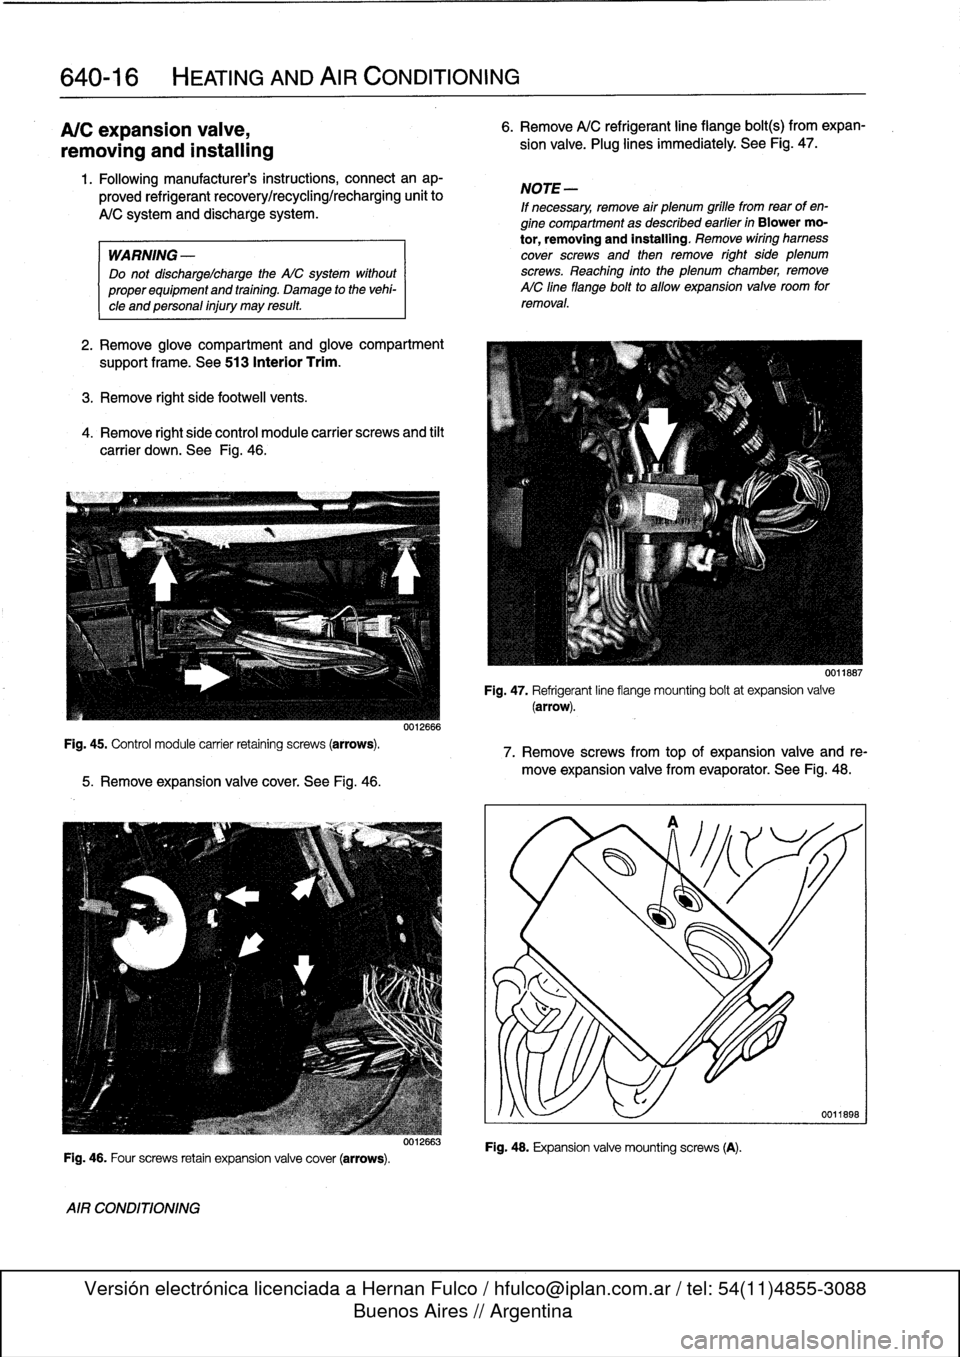 BMW 328i 1998 E36 Owners Manual 
640-16

	

HEATING
AND
AIR
CONDITIONING

A/C
expansion
valve,

removing
and
installing

Fig
.
45
.
Control
module
carrier
retaining
screws
(arrows)
.

1
.
Following
manufacturers
instructions,
connec